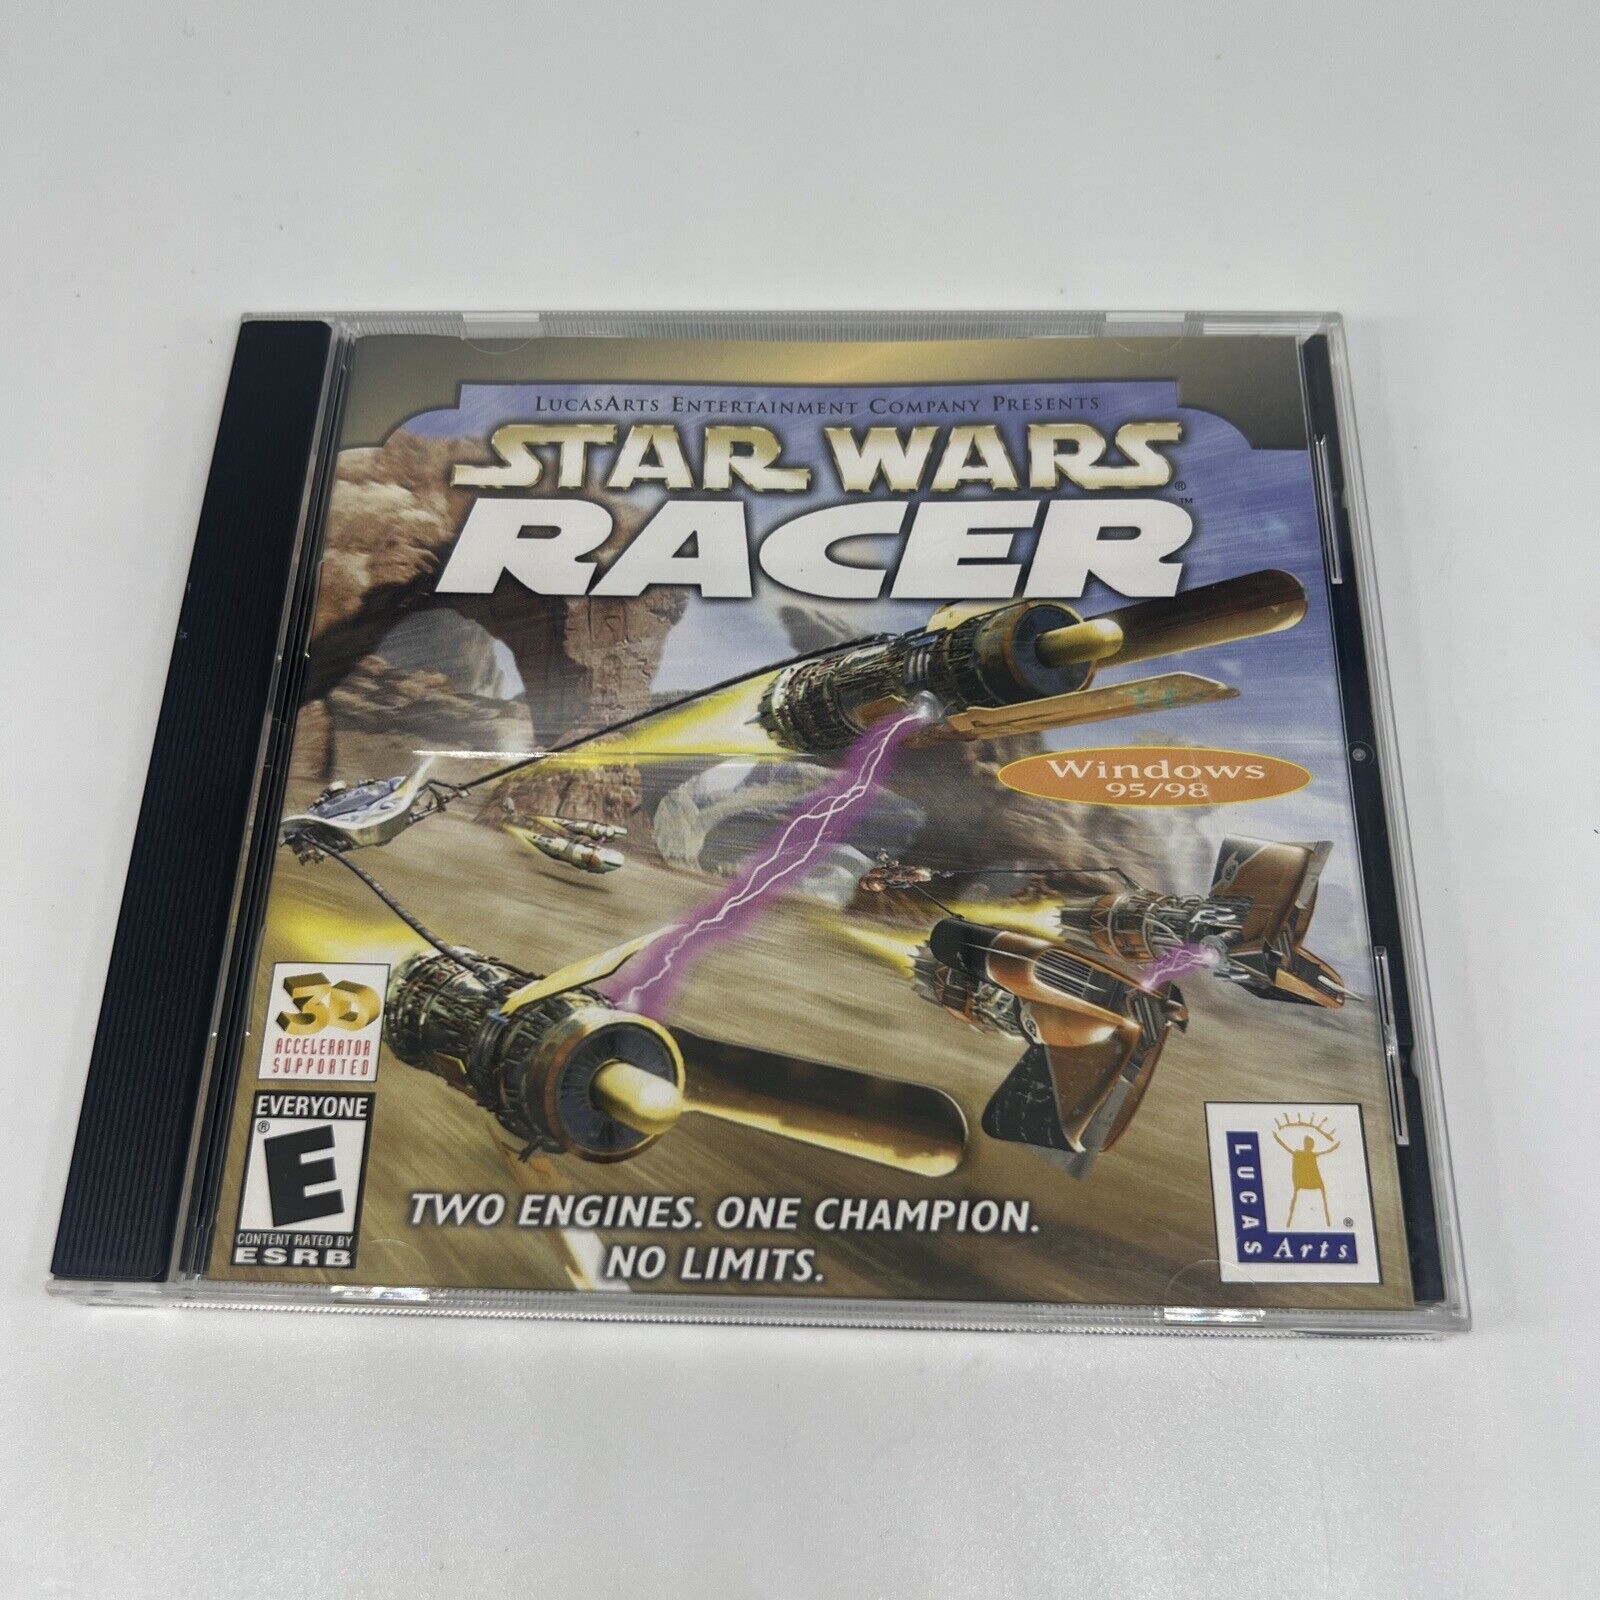 Star Wars Racer Windows/PC Computer Game by LucasArts [rated E for Everyone]